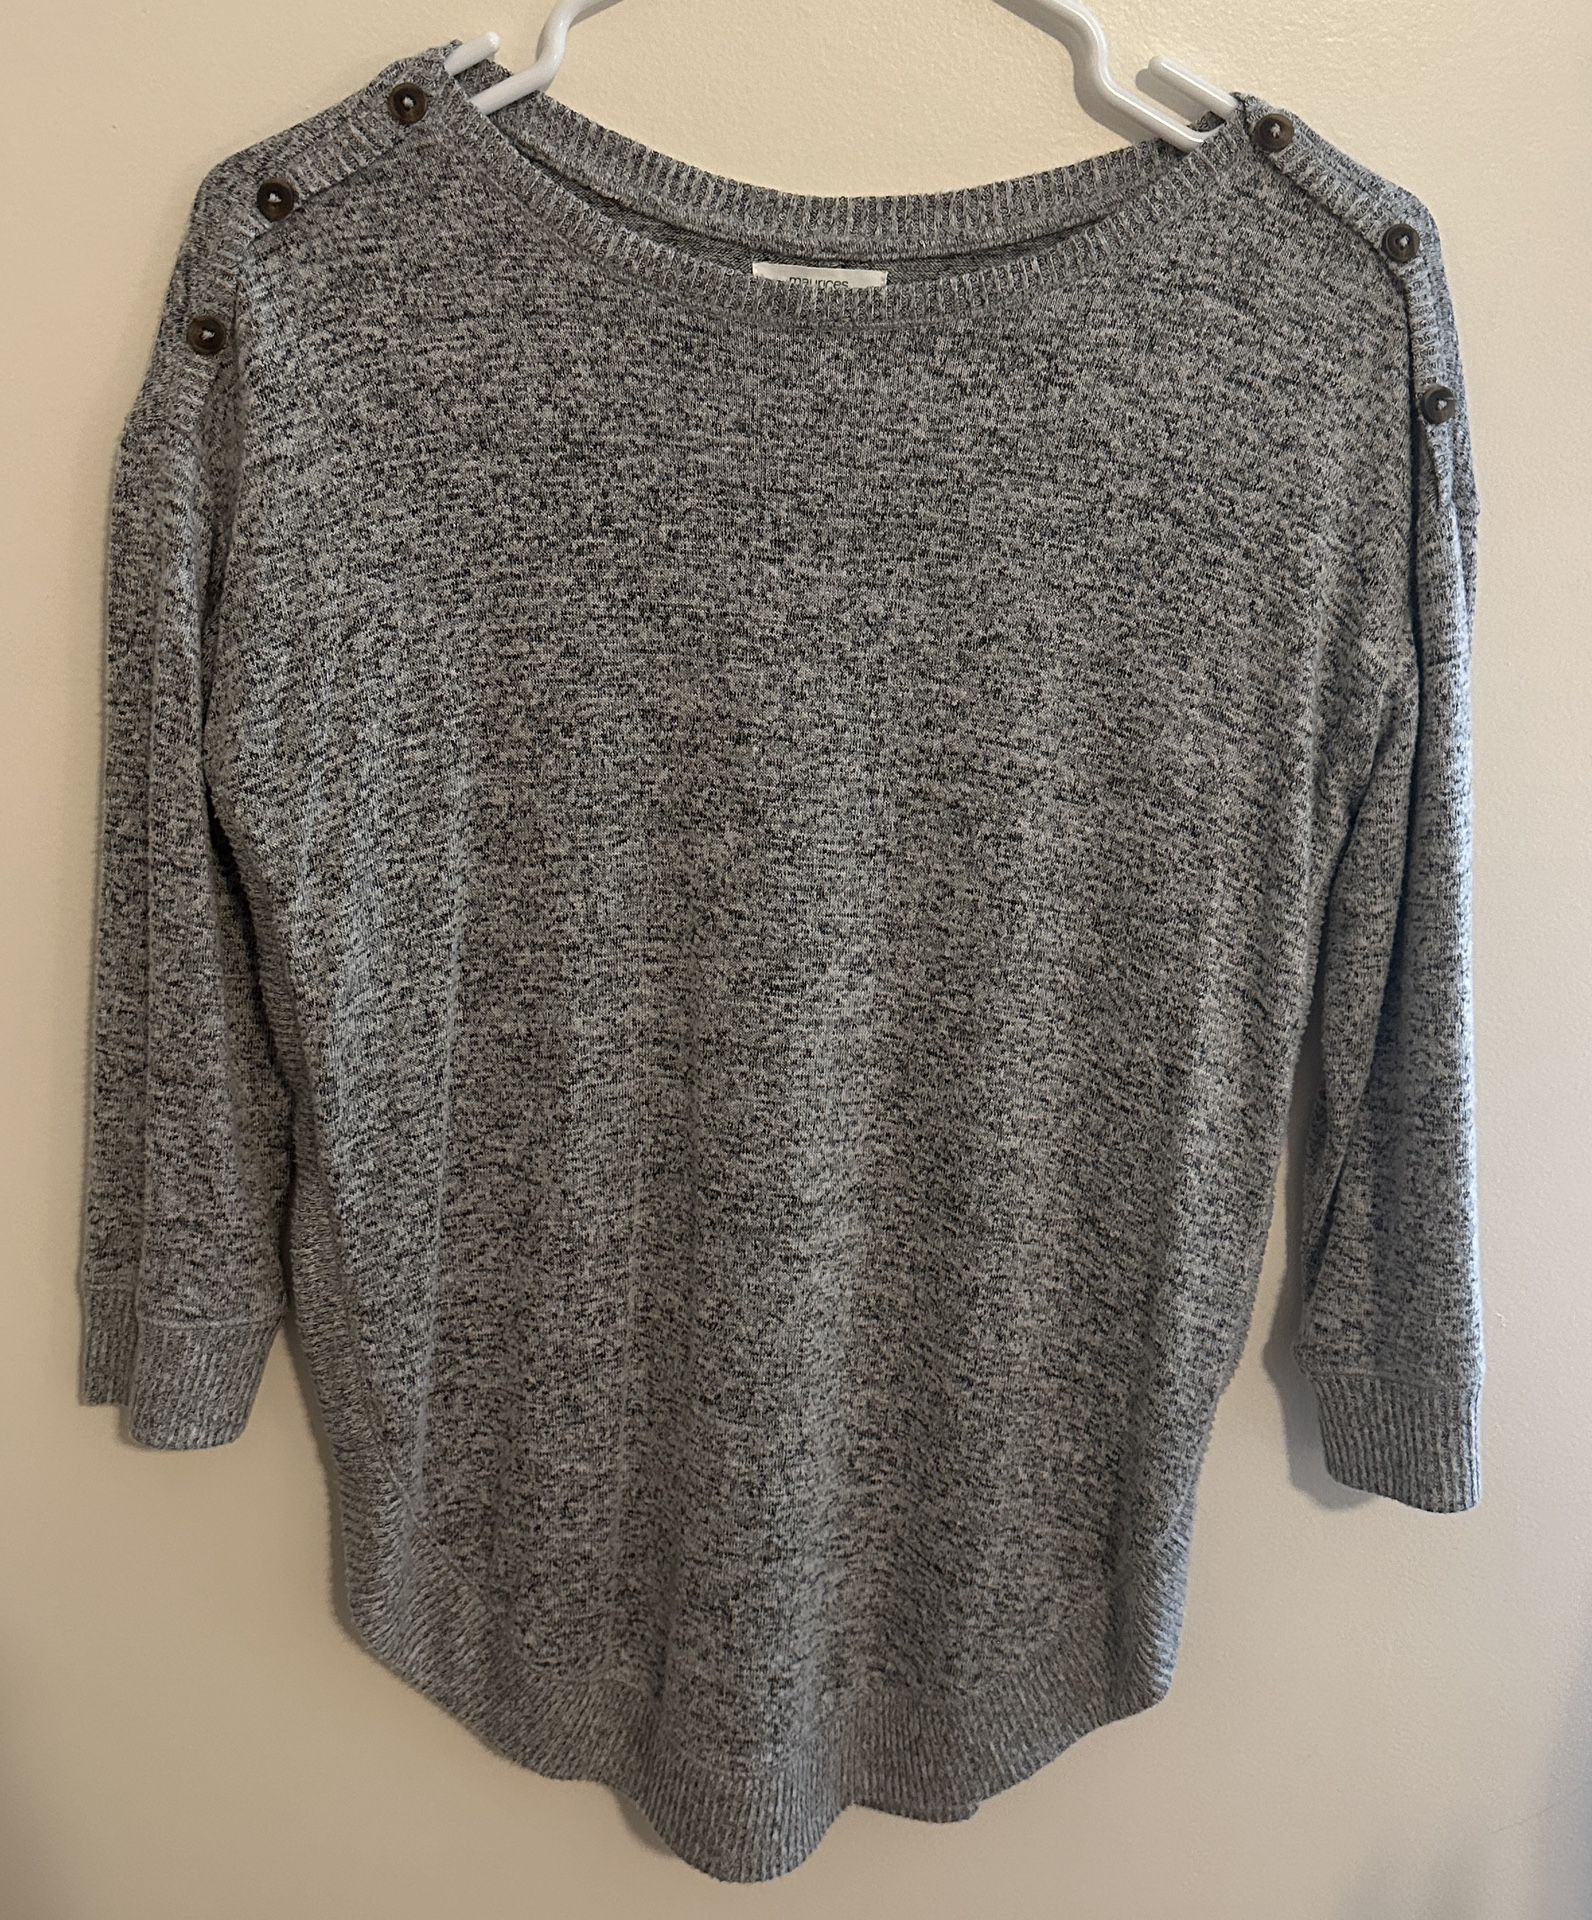 Maurices Gray Round Neck Tunic - Size XSmall But Runs Big